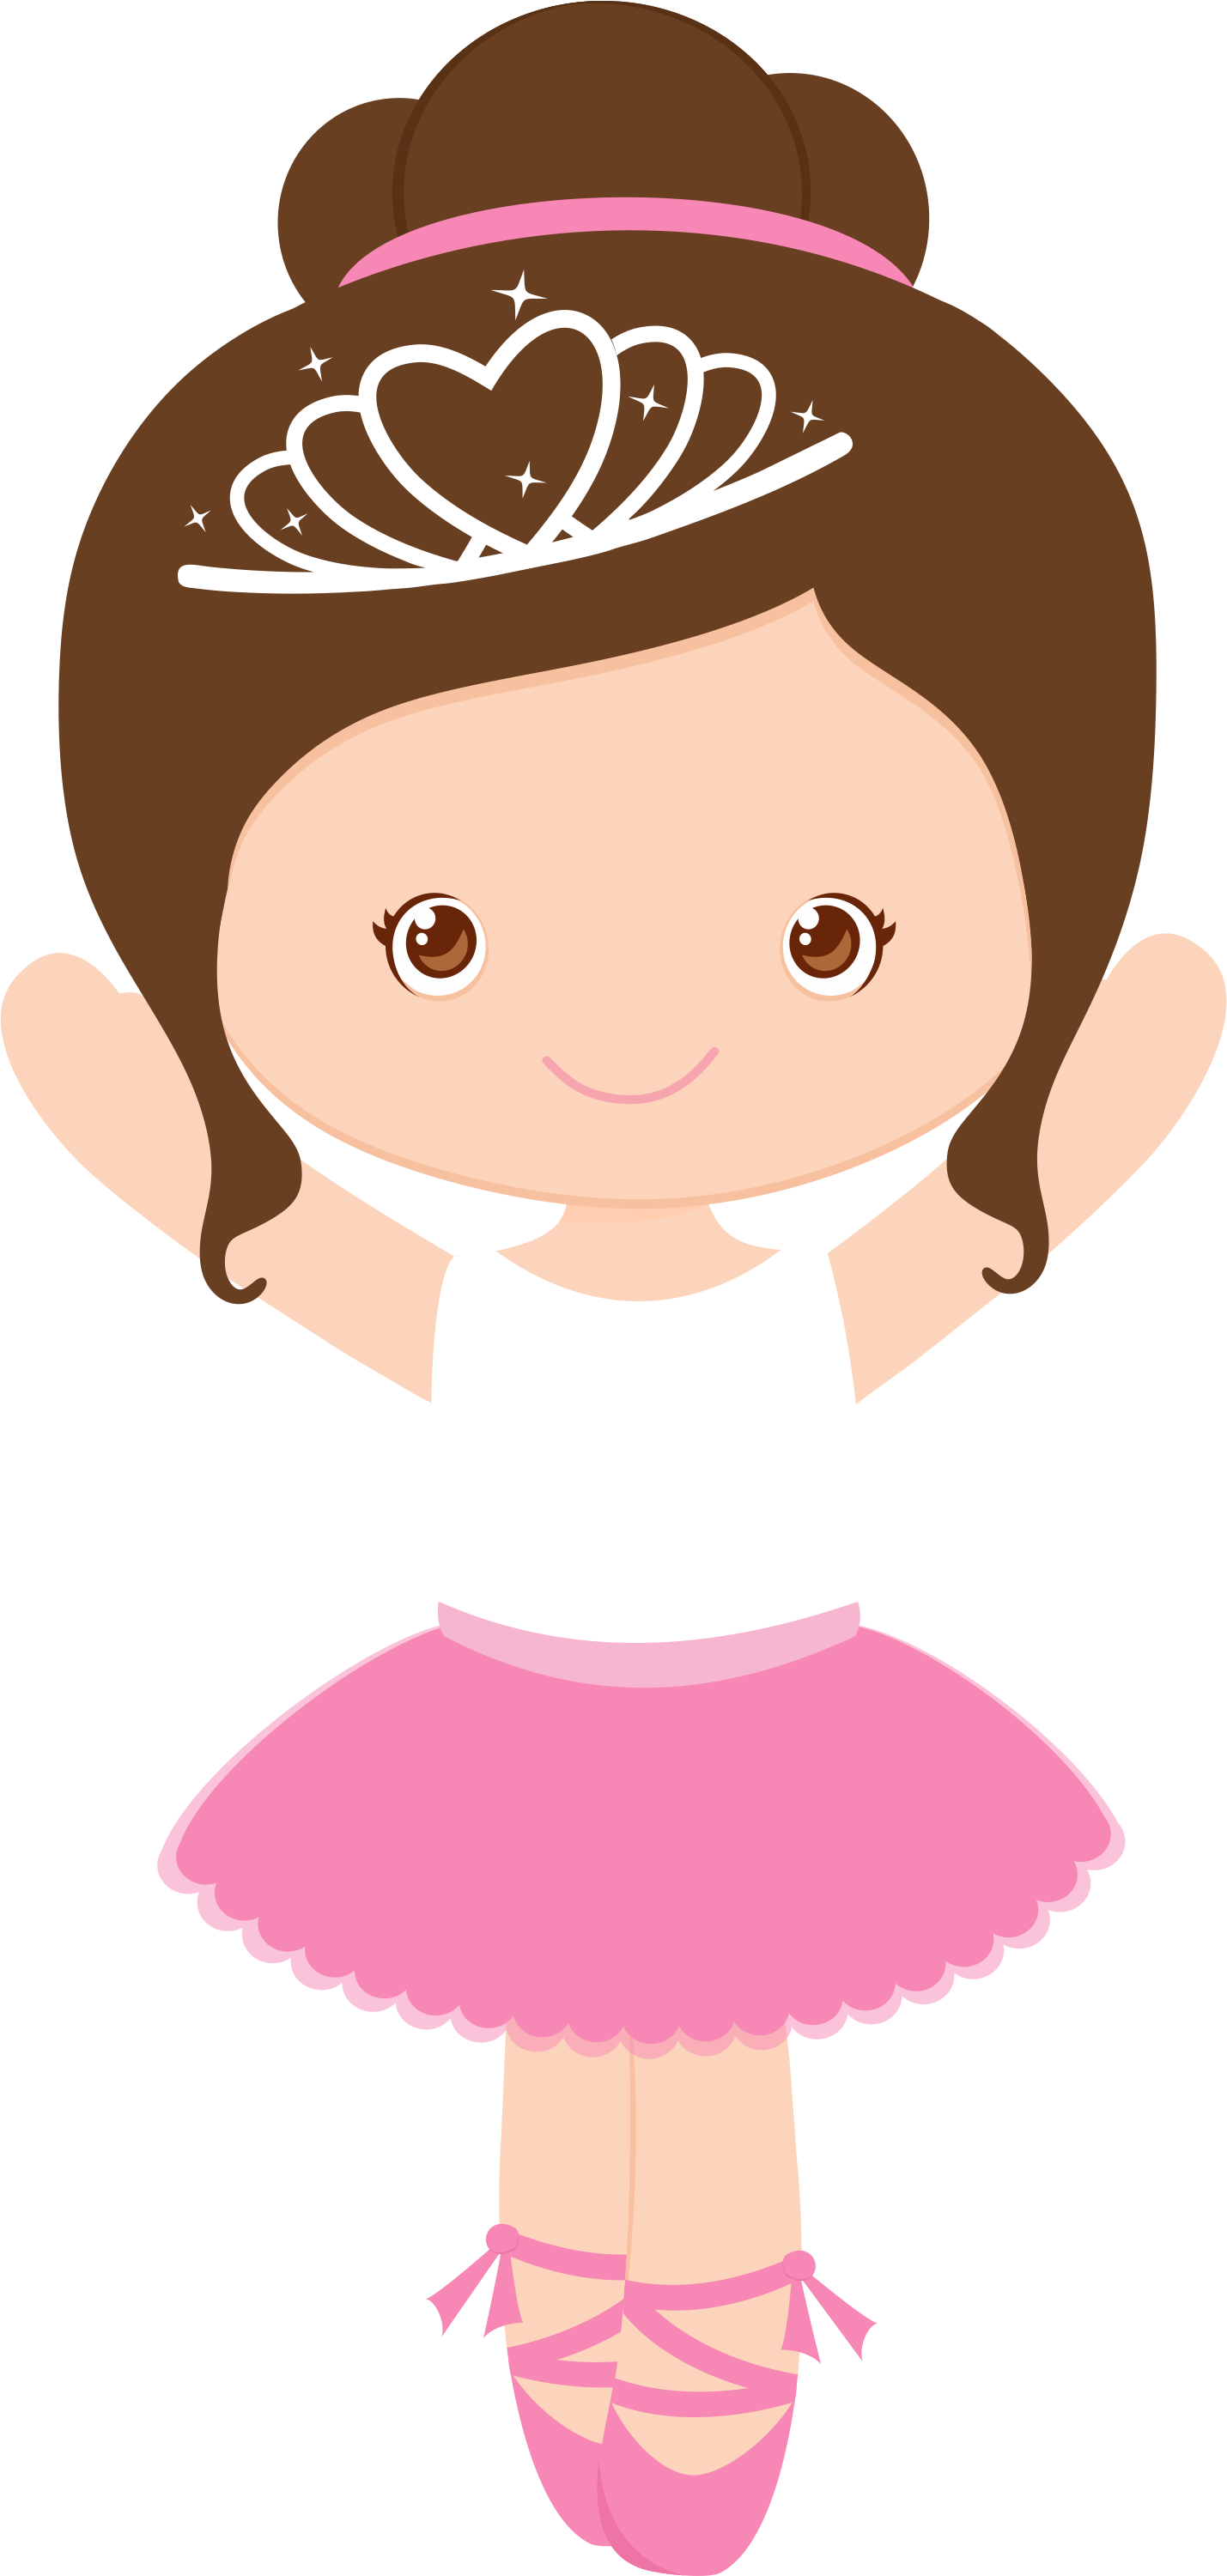 Ballet clipart cute baby. Pin by zlem y